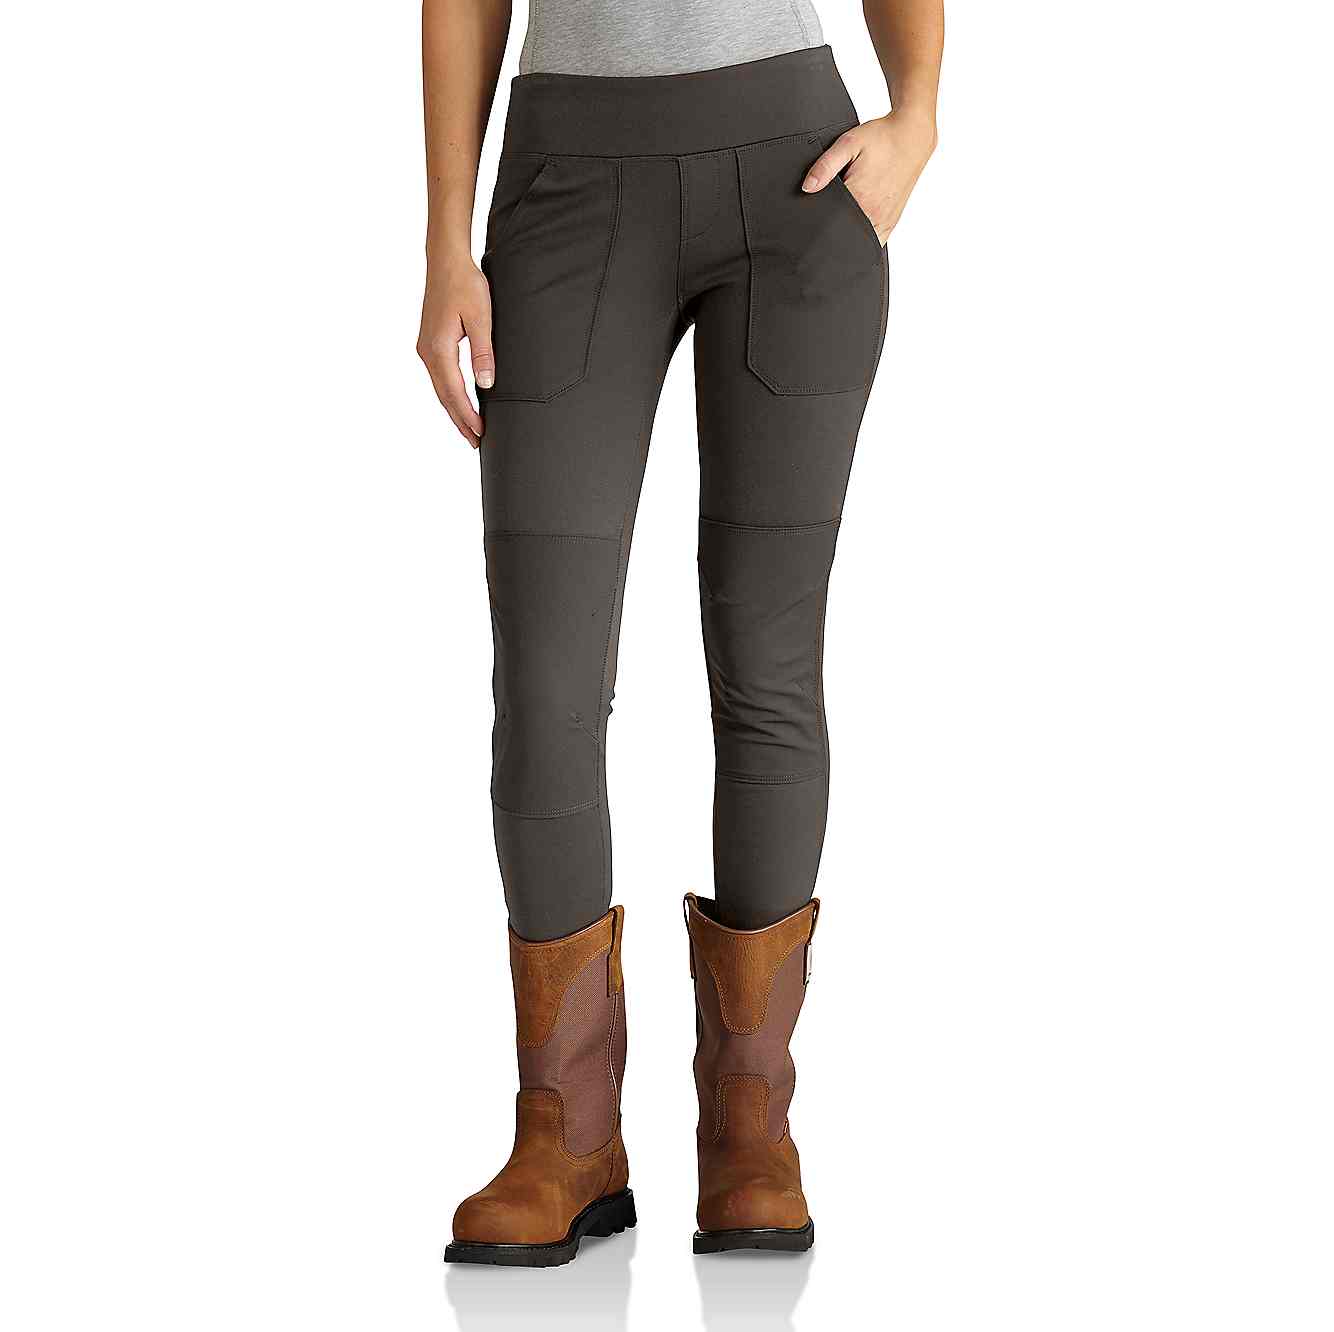 Carhartt Women's Force Fitted Midweight Utility Palestine